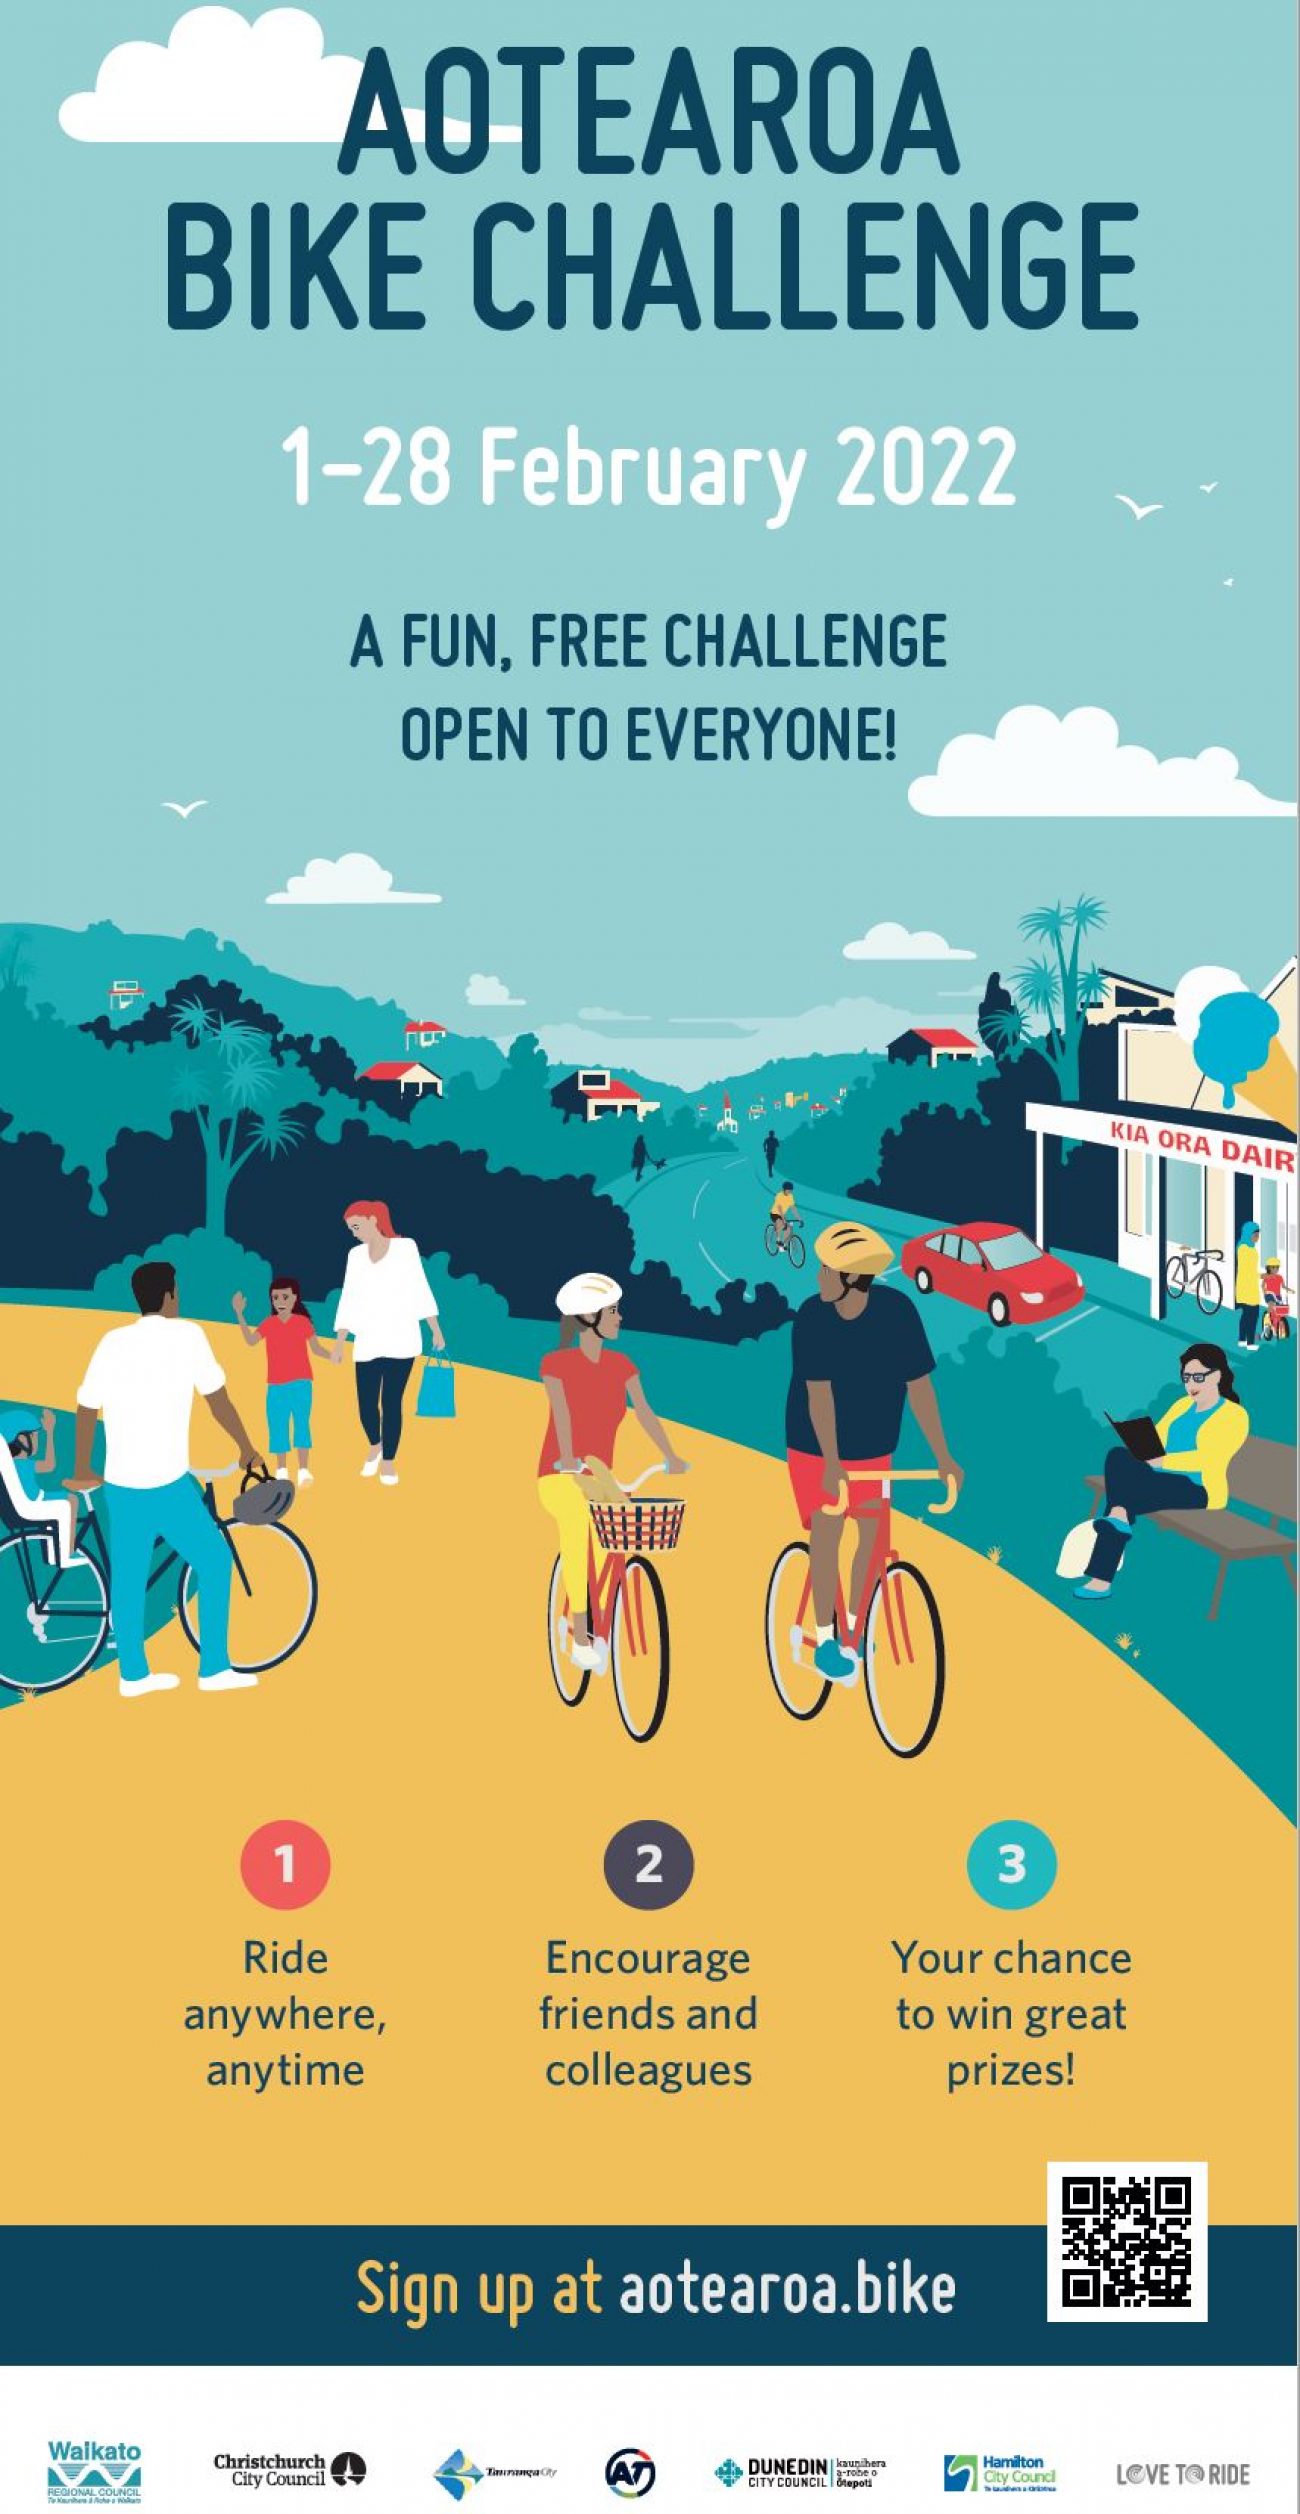 Council staff join Aotearoa Bike Challenge for the sixth year